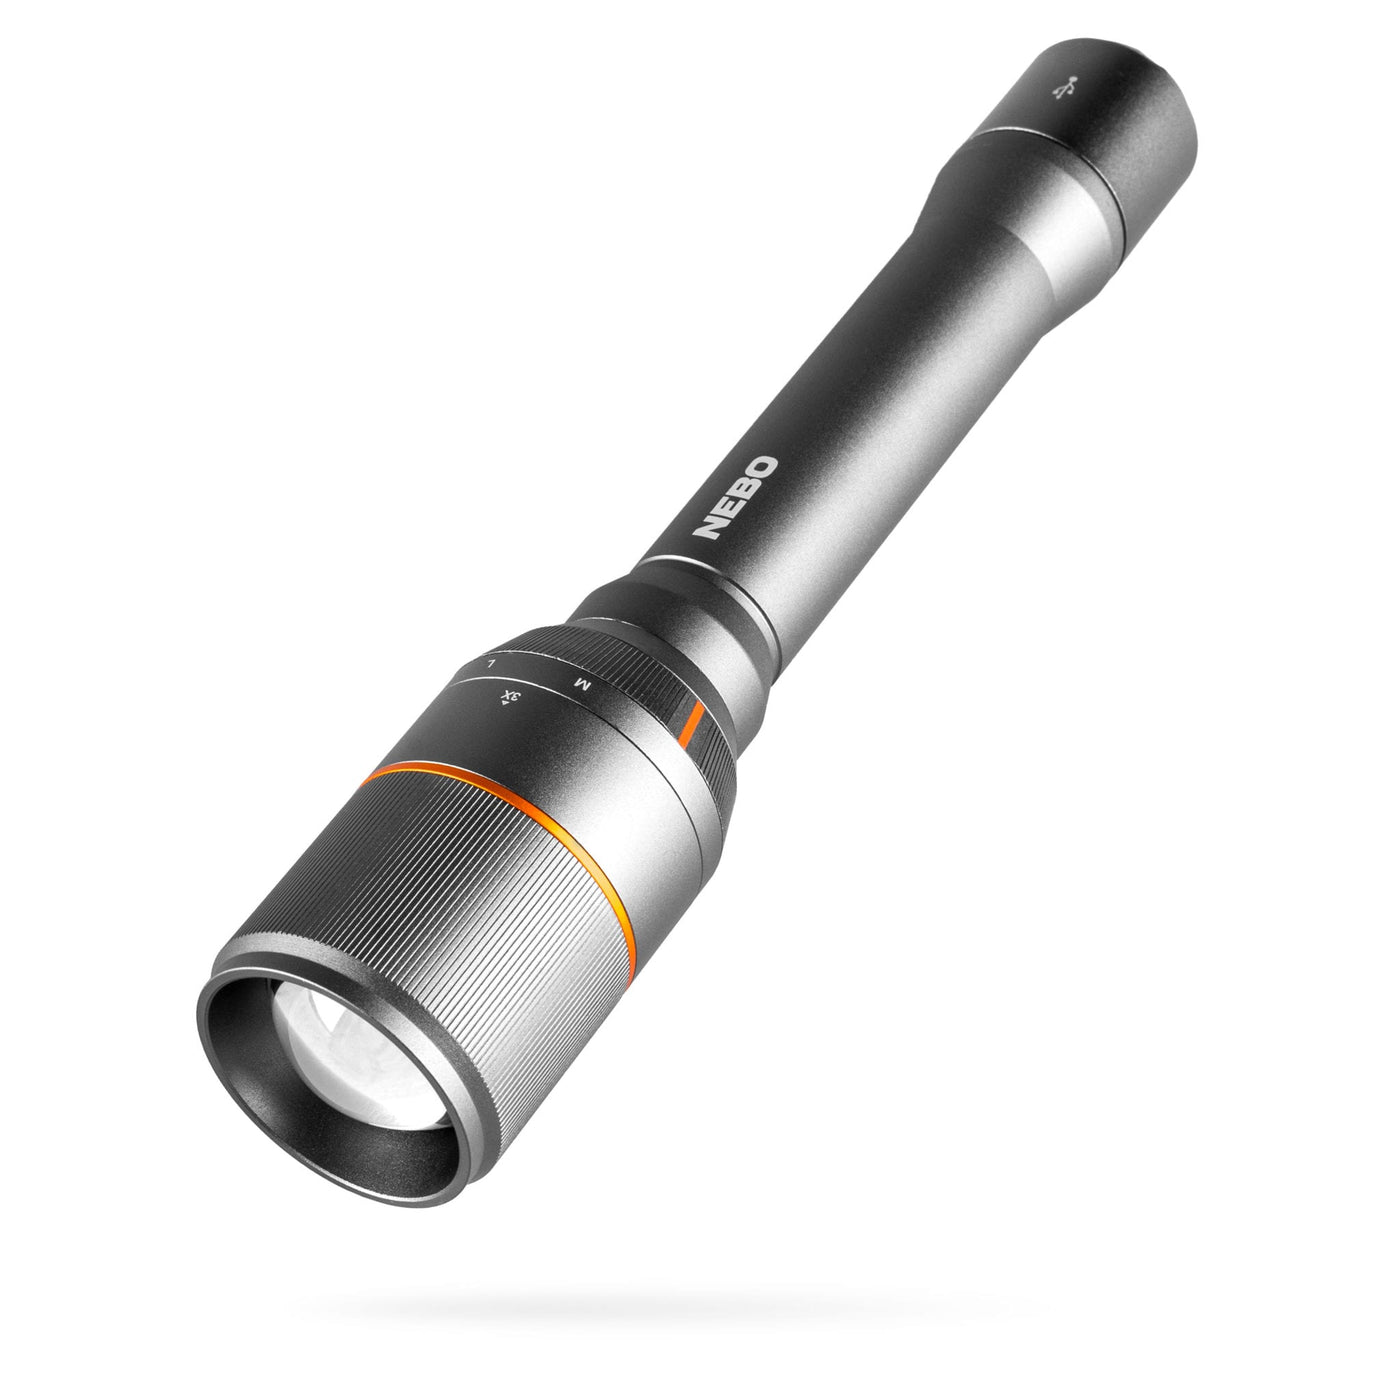 At Nebo Tools, we continually innovate so that we can offer the highest quality LED lighting products at the best price. The Davinci™ 5000 lumen rechargeable flashlight by NEBO is a powerful handheld flashlight with 4 light modes and an included power bank. The included mode selection dial makes it easy to switch between modes and the powerful LED in this flashlight can light up 192 meters. The included battery allows for up to 20 hours of operation in between charges.